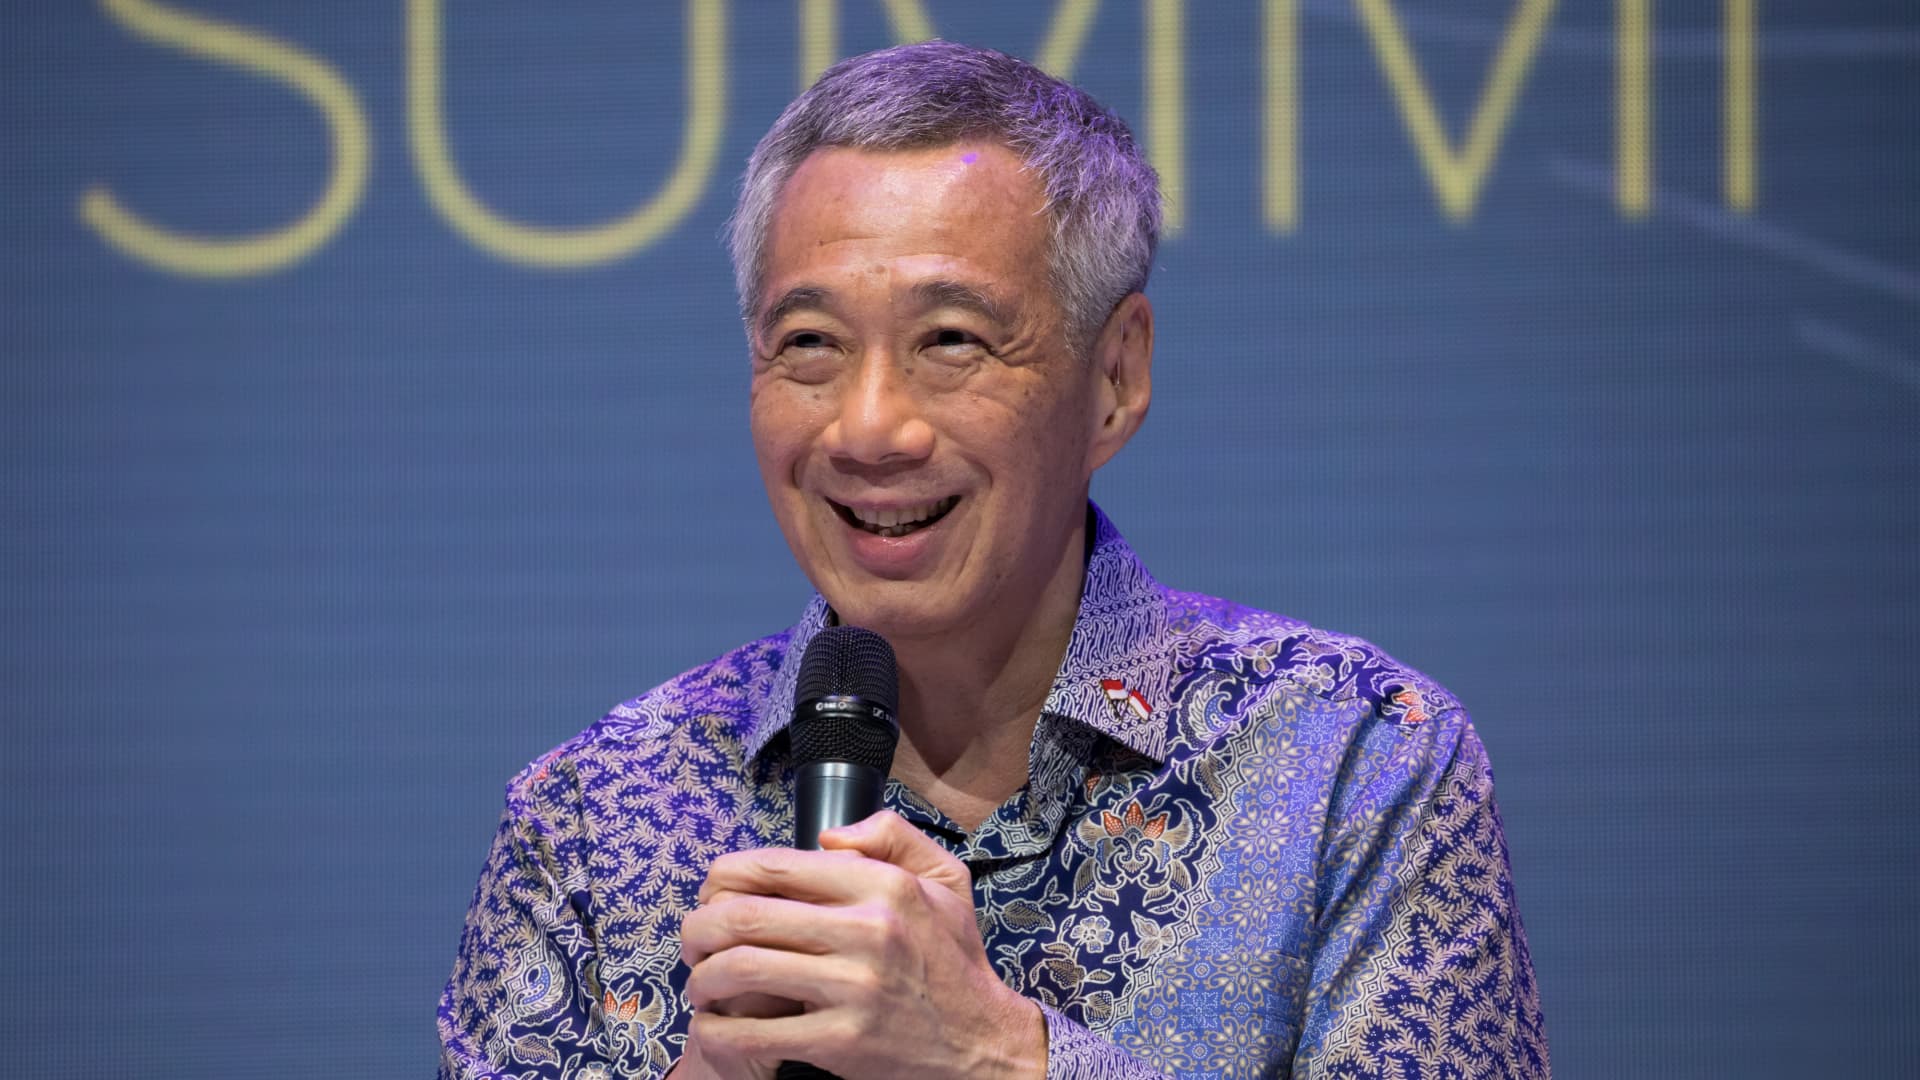 Singapore’s Prime Minister Lee Hsien Loong tests positive for Covid